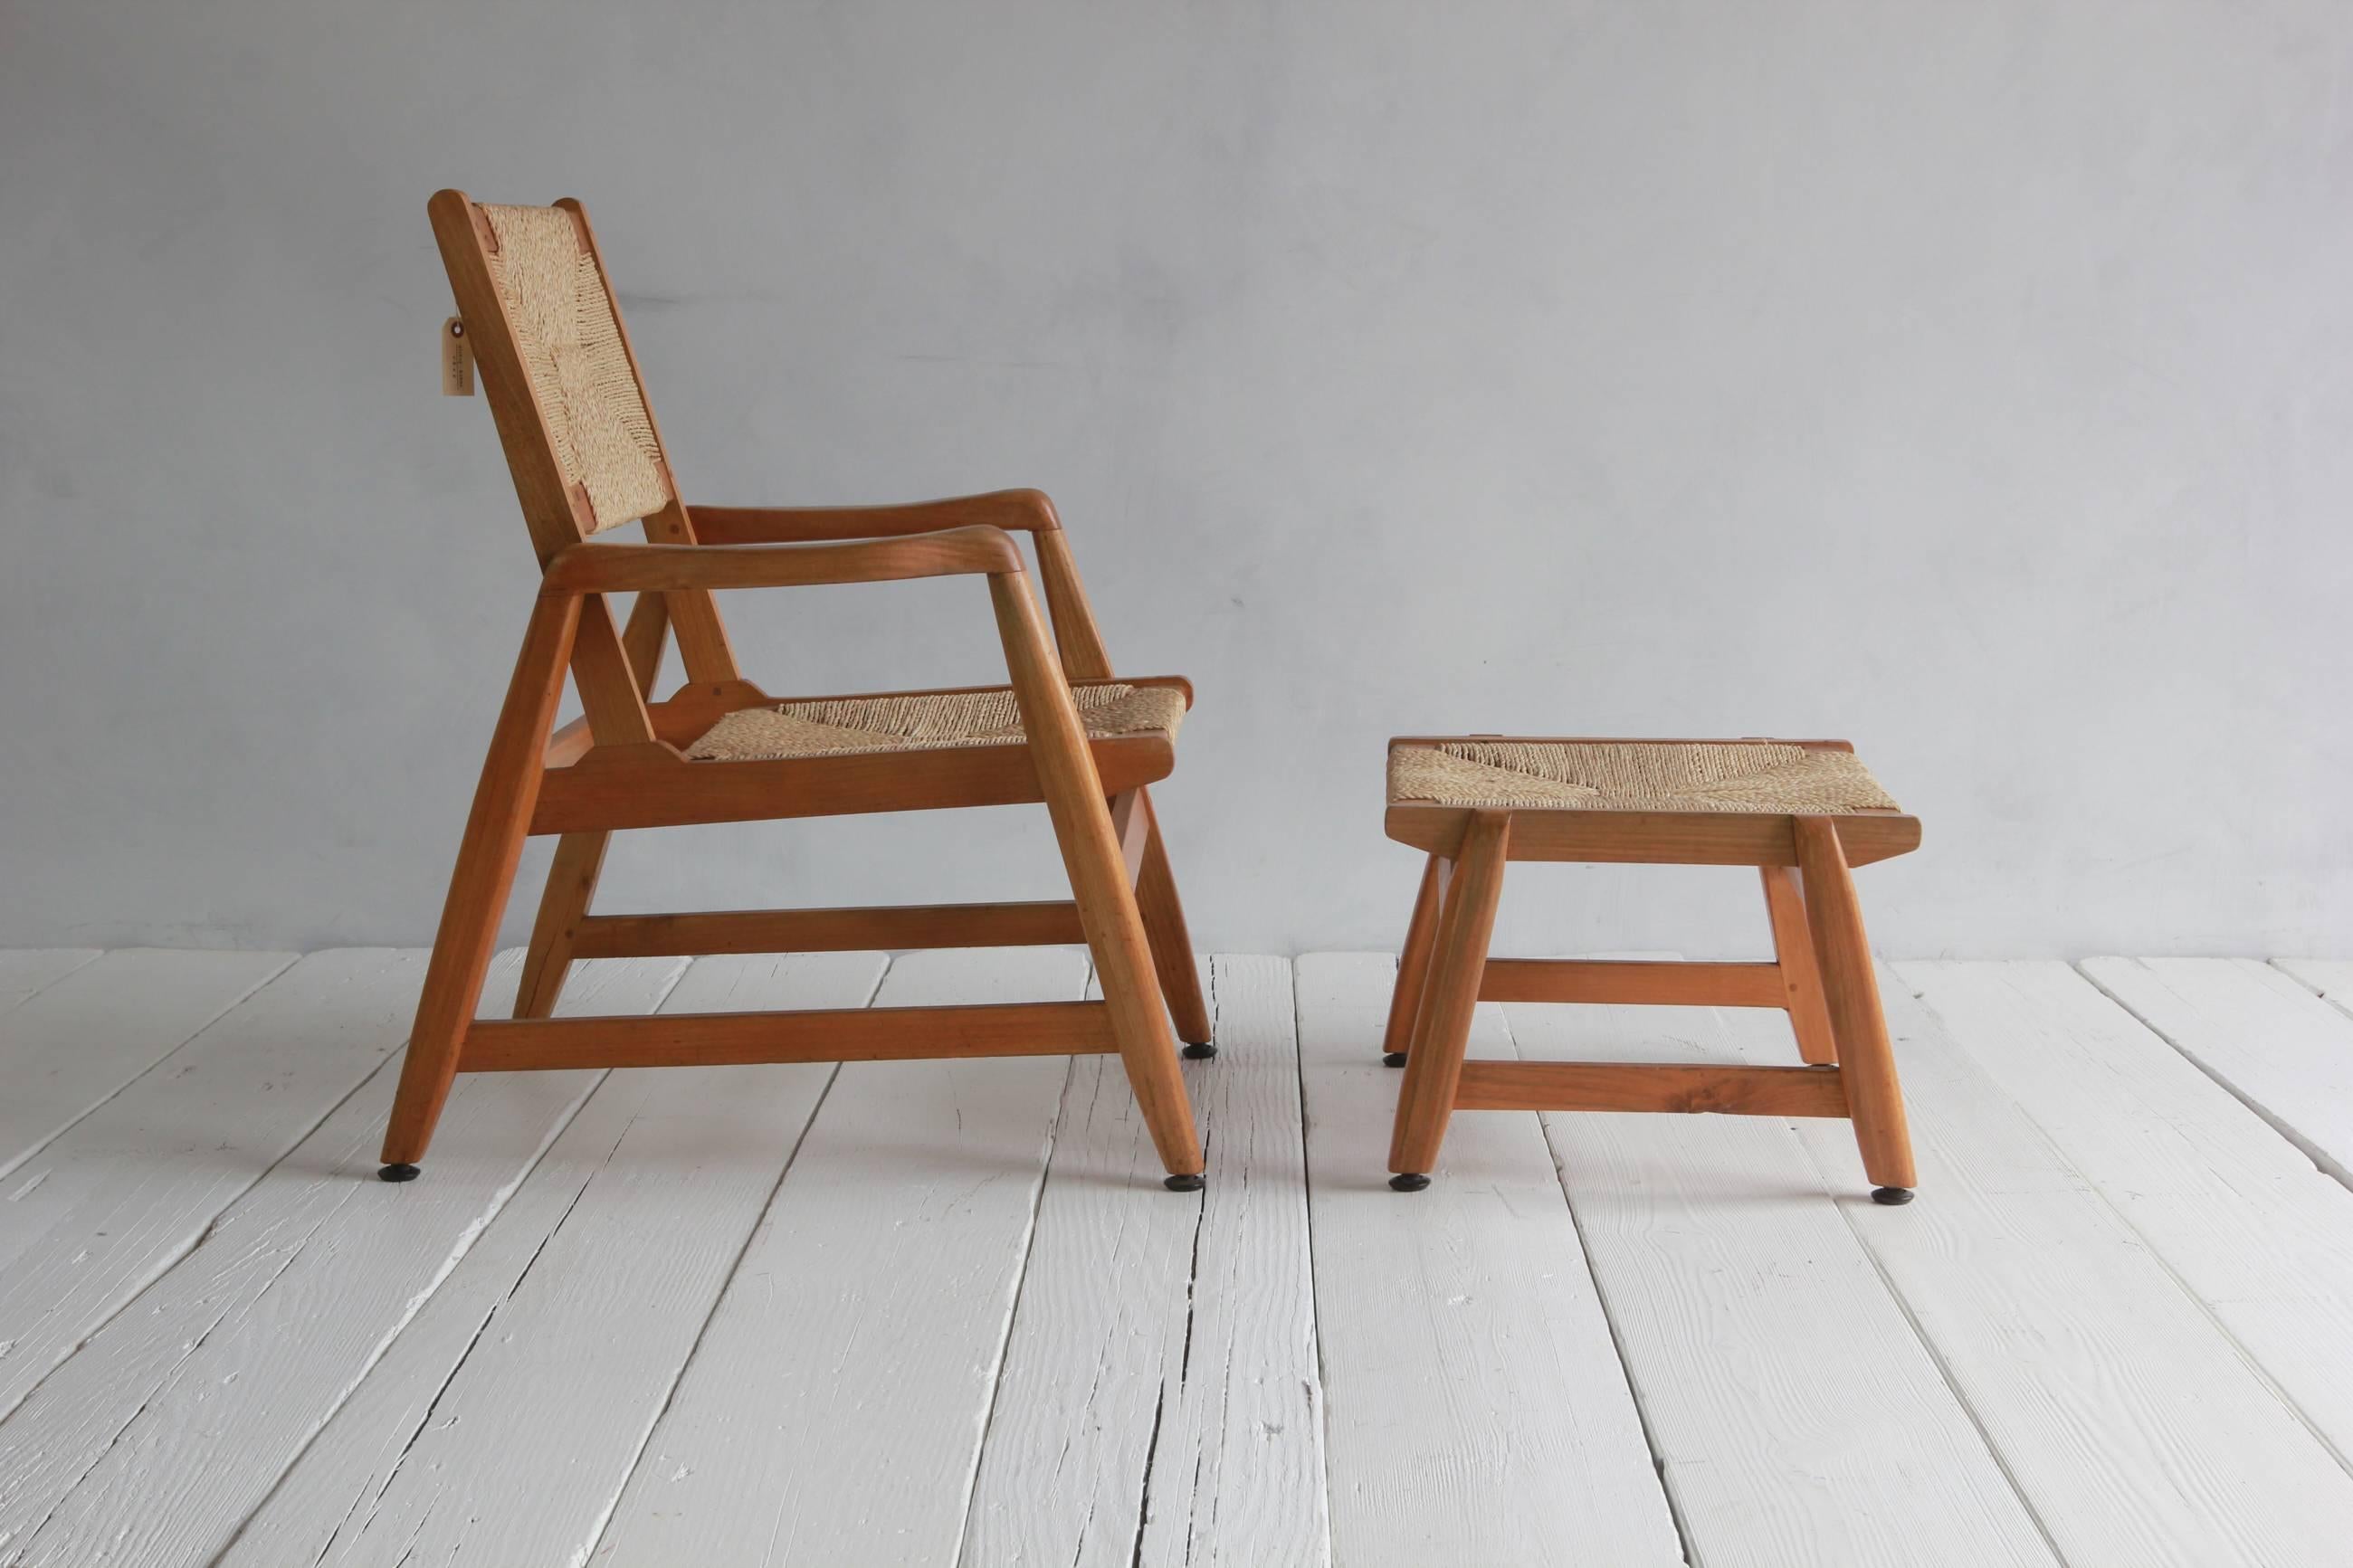 Danish wood framed chair and foot stool with woven rush details.

Foot stool measures: 20